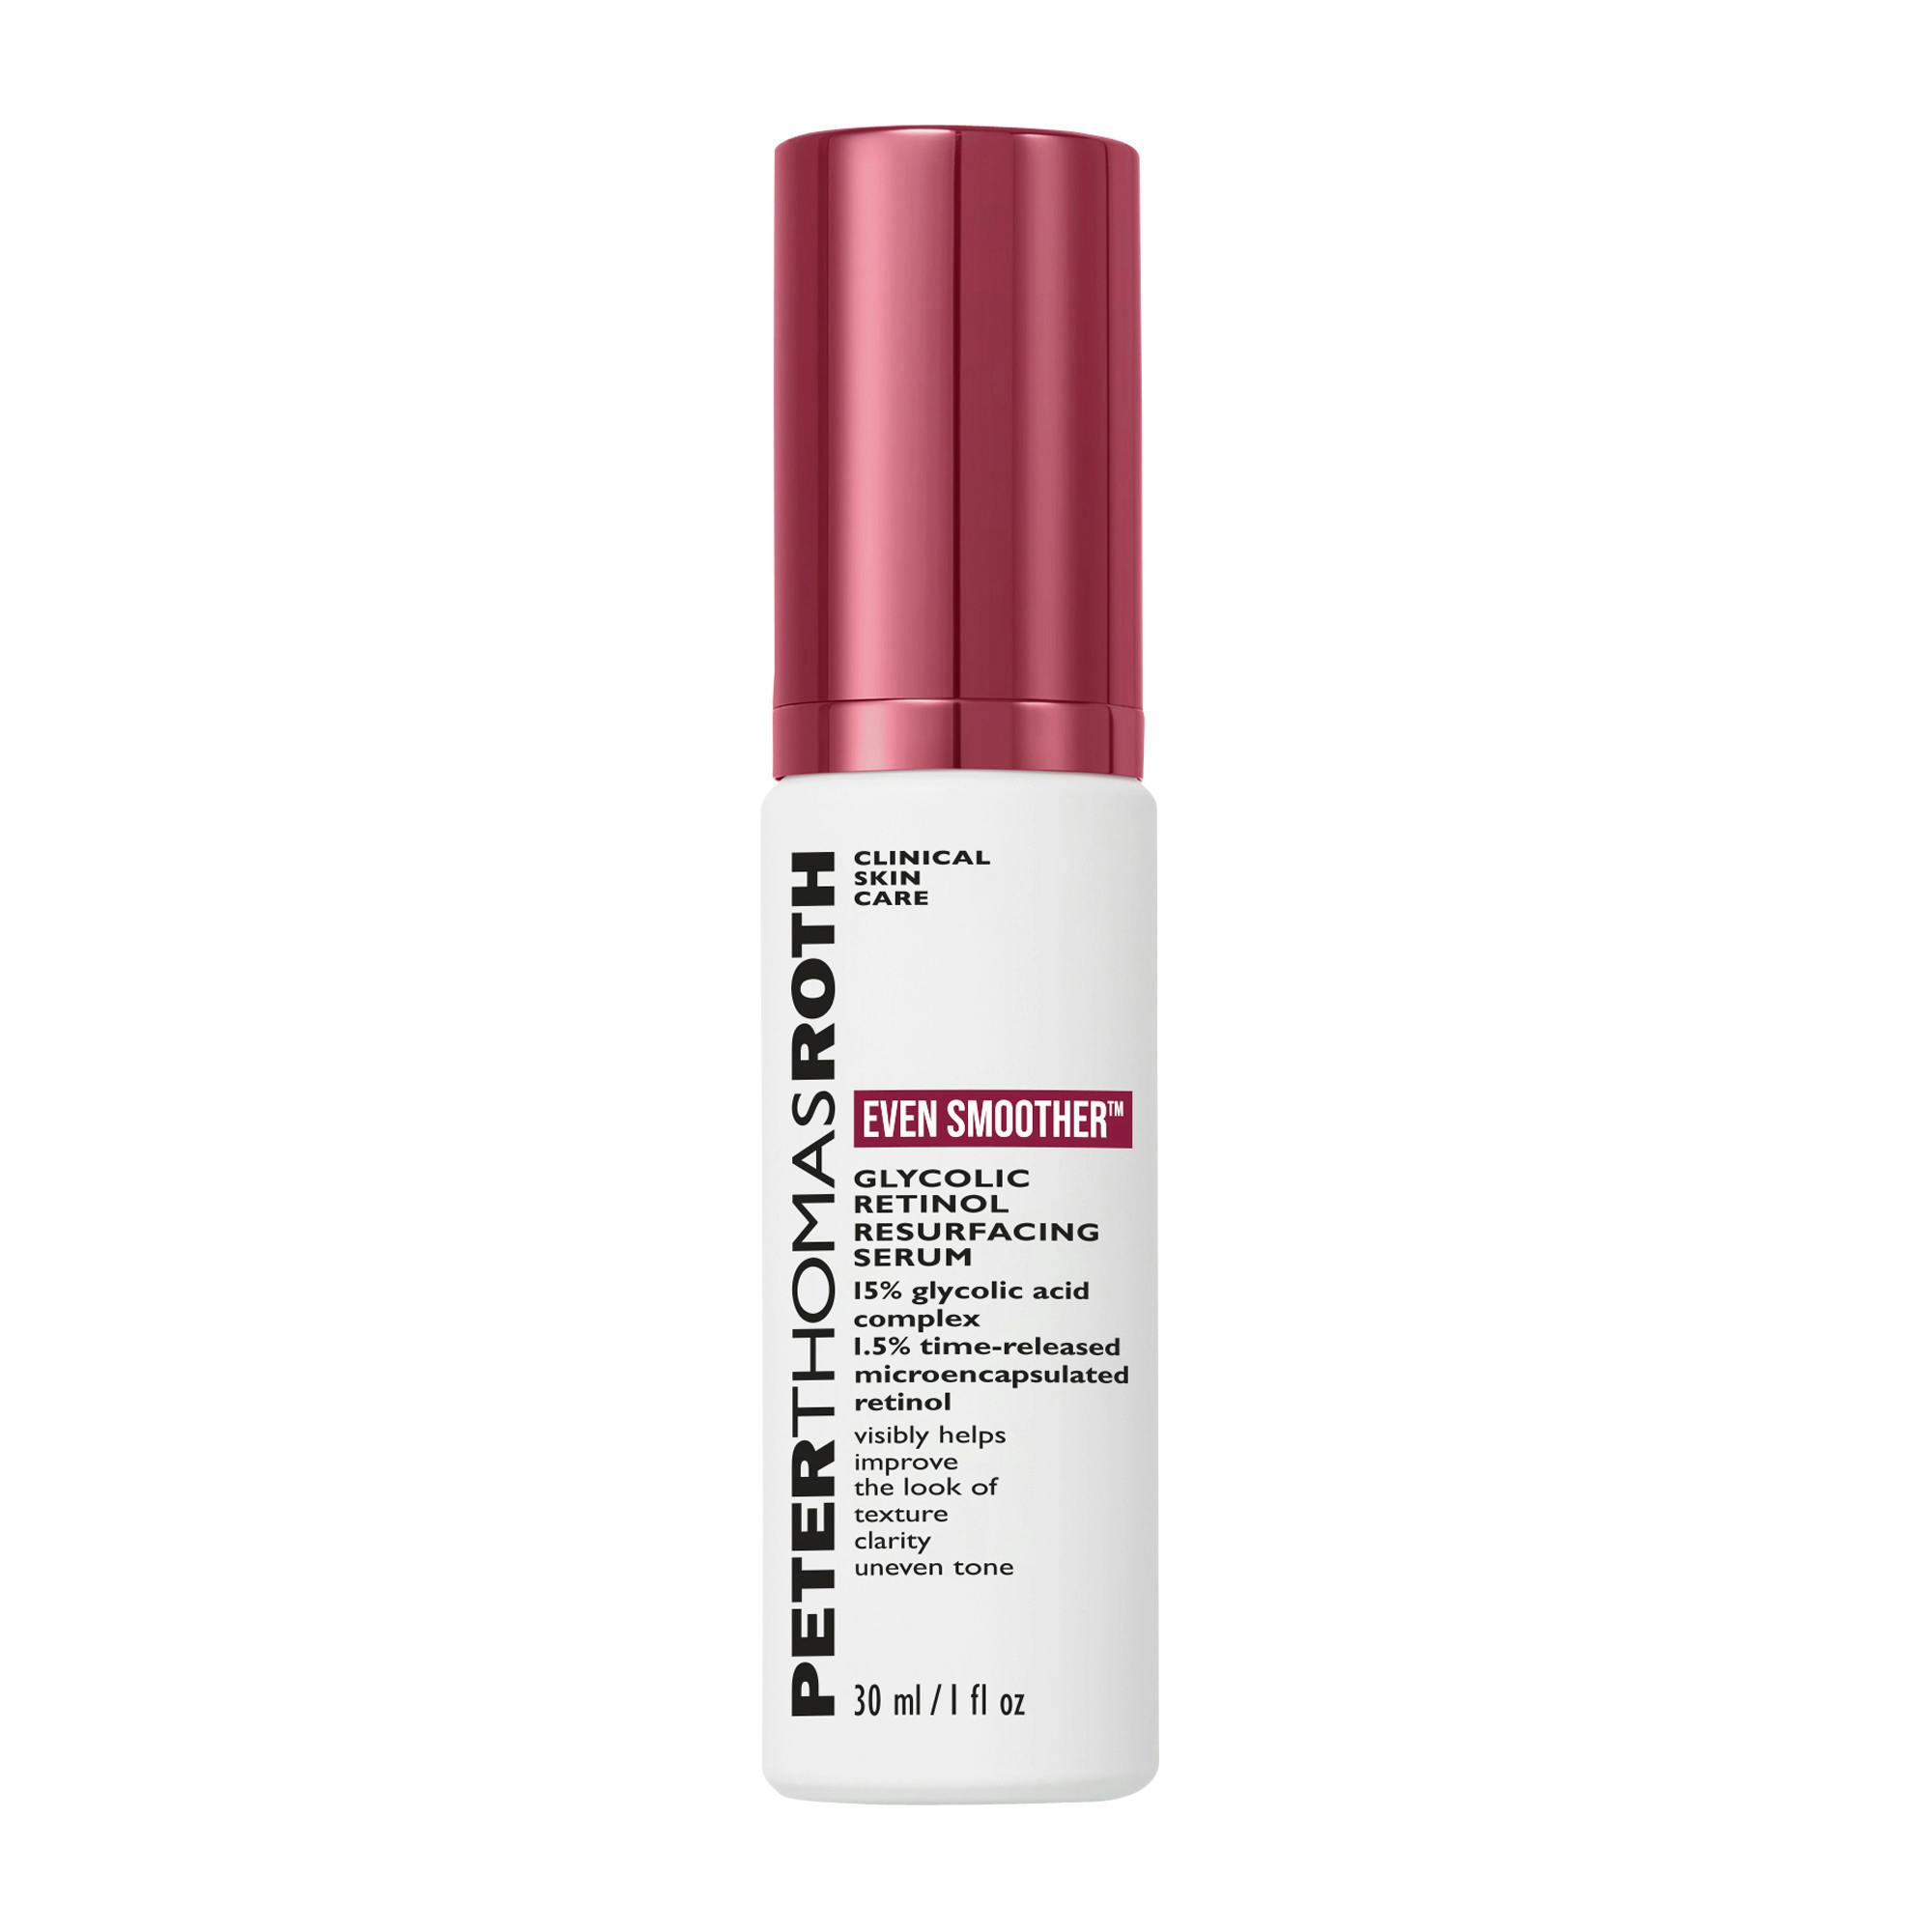 Peter Thomas Roth Even Smoother Glycolic Retinol Resurfacing Serum 30ml  -  Even Smoother™ Glycolic Retinol Resurfacing Serum 30ml